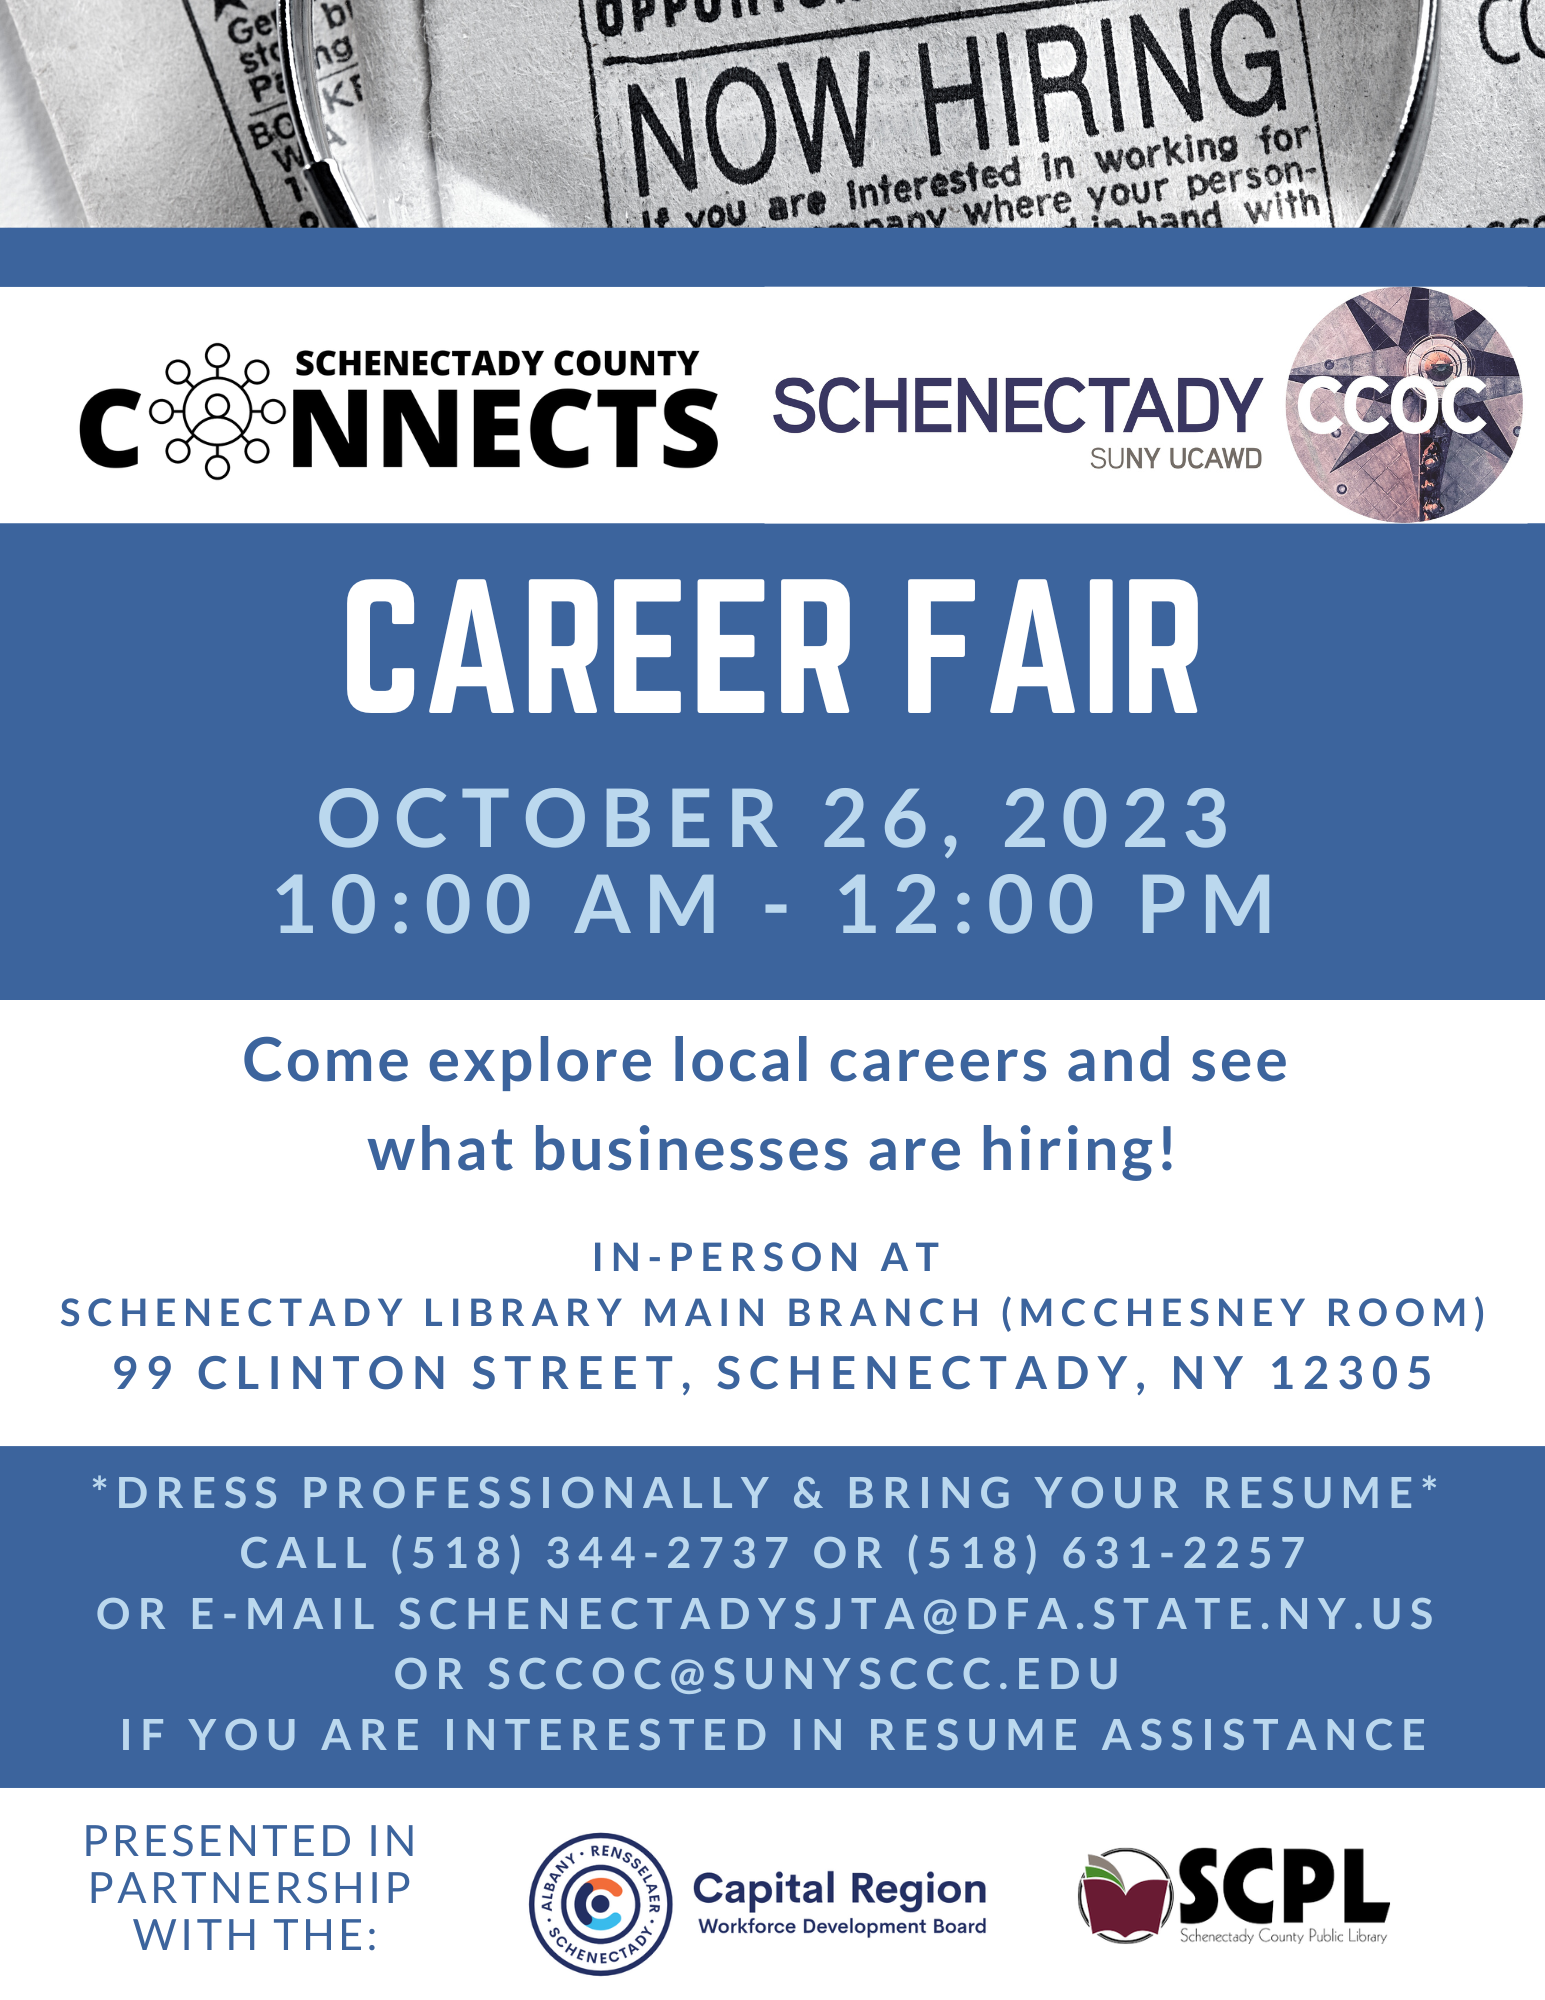 Schenectady Connects Career Fair flyer